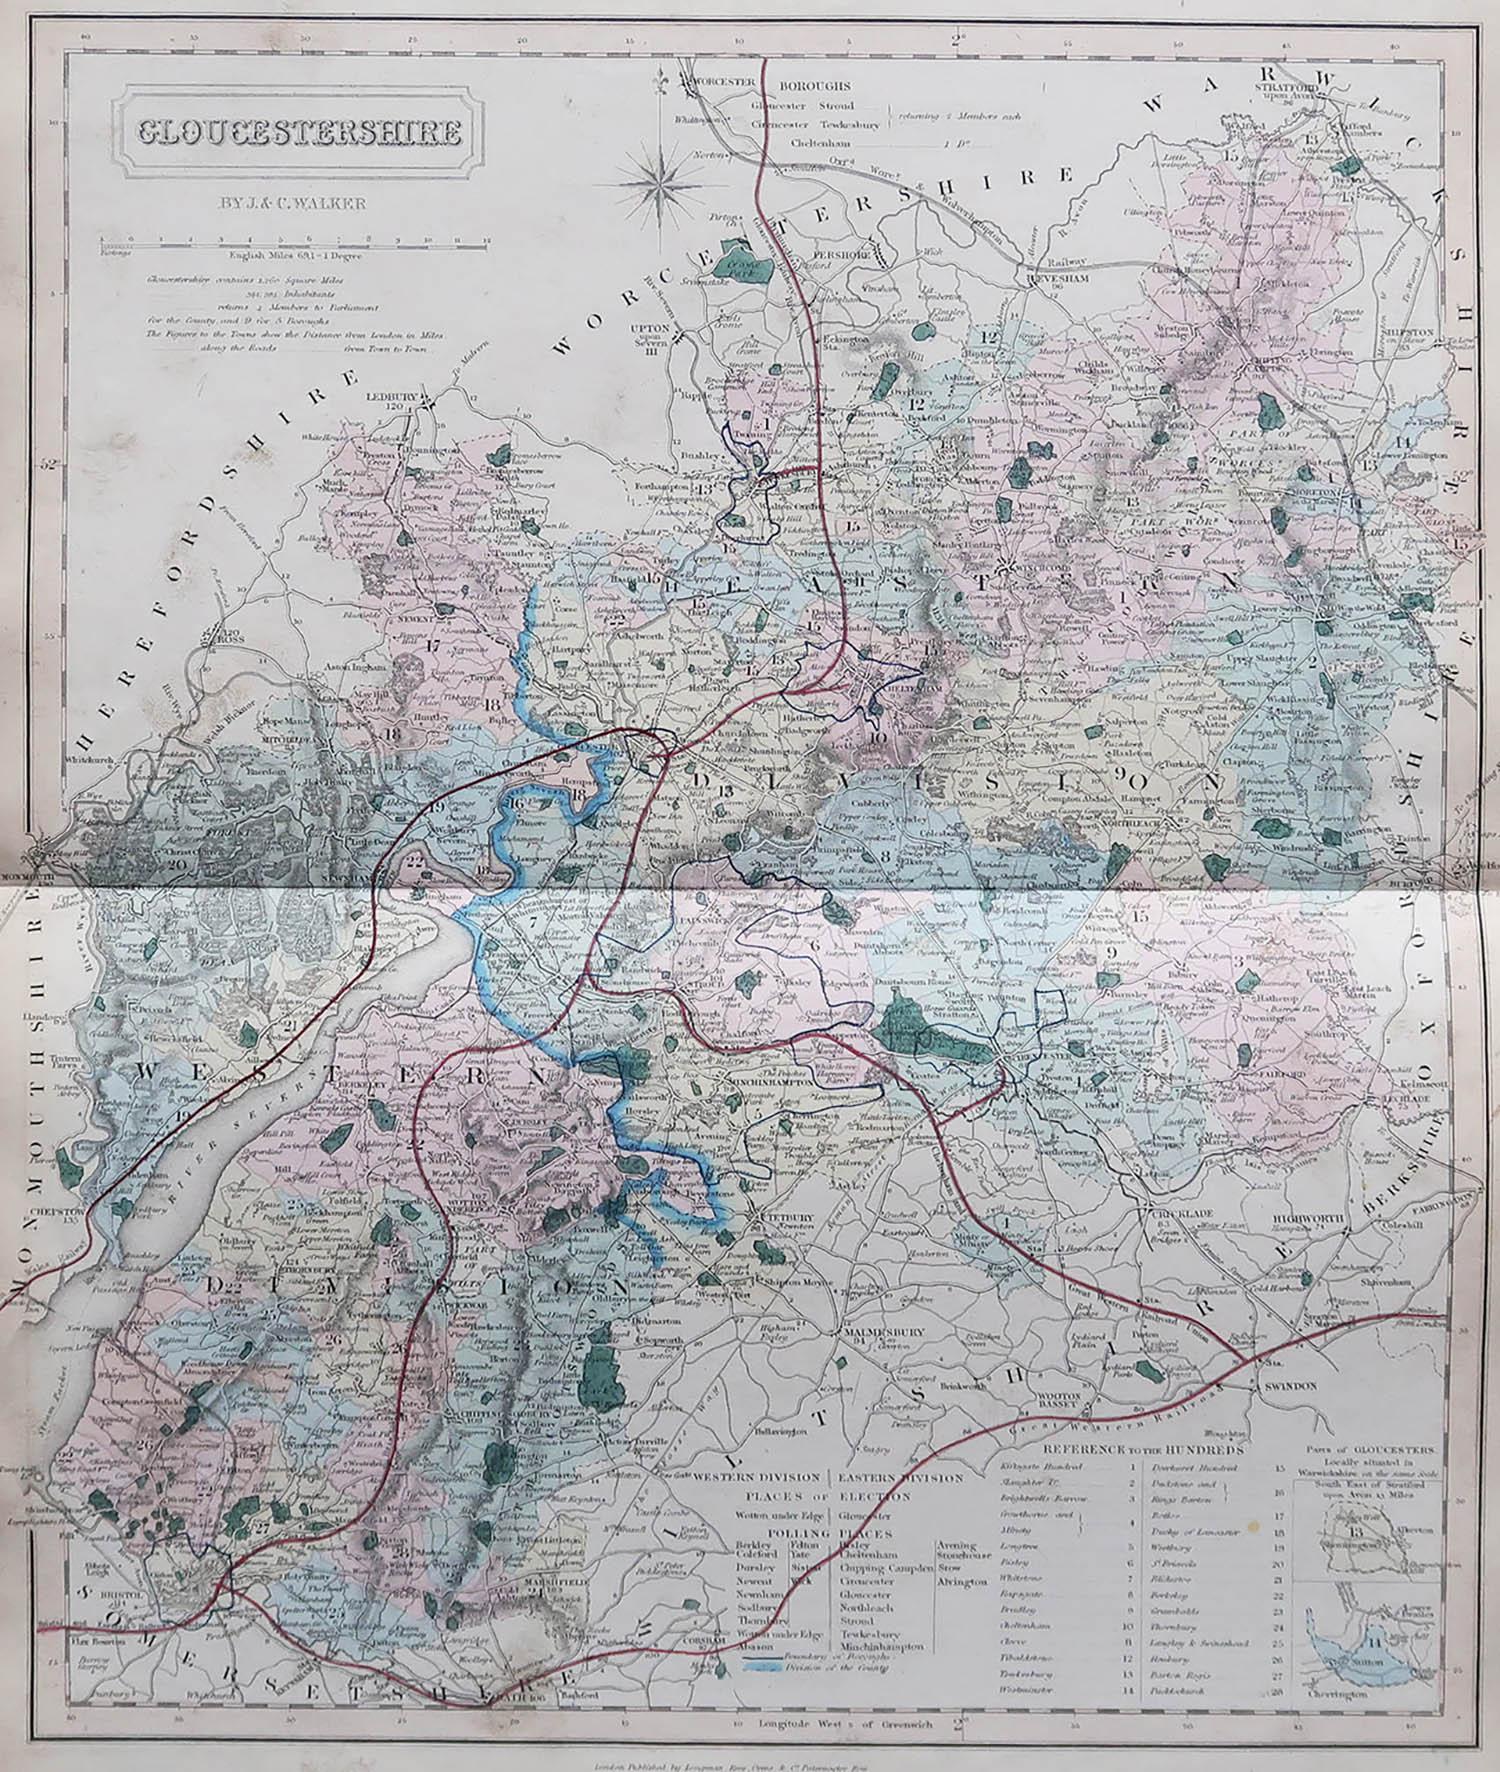 Great map of Gloucestershire

Original colour

By J & C Walker

Published by Longman, Rees, Orme, Brown & Co. 1851

Unframed.




